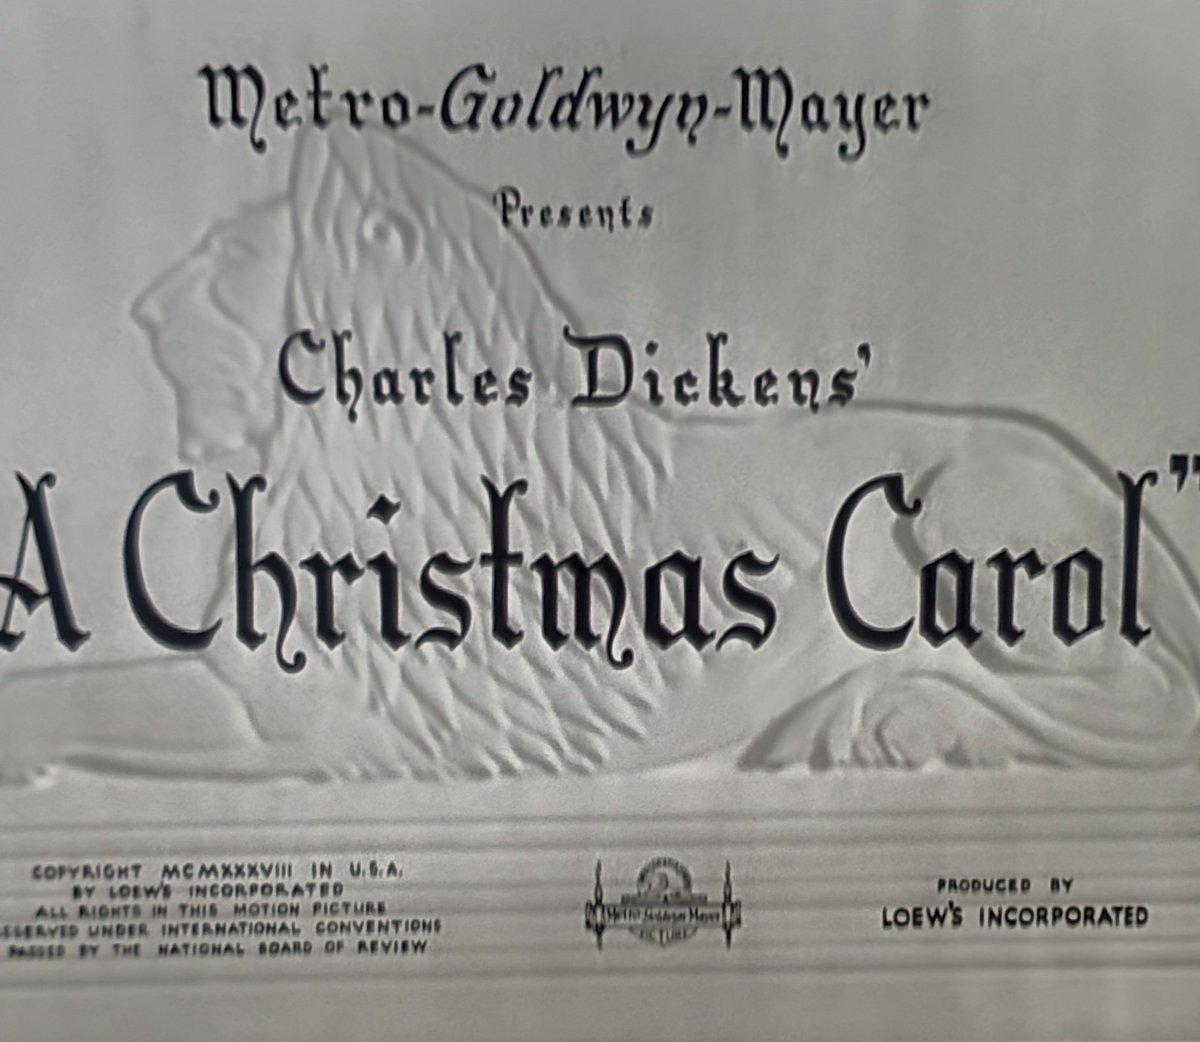 It's time. #TCMParty #AChristmasCarol